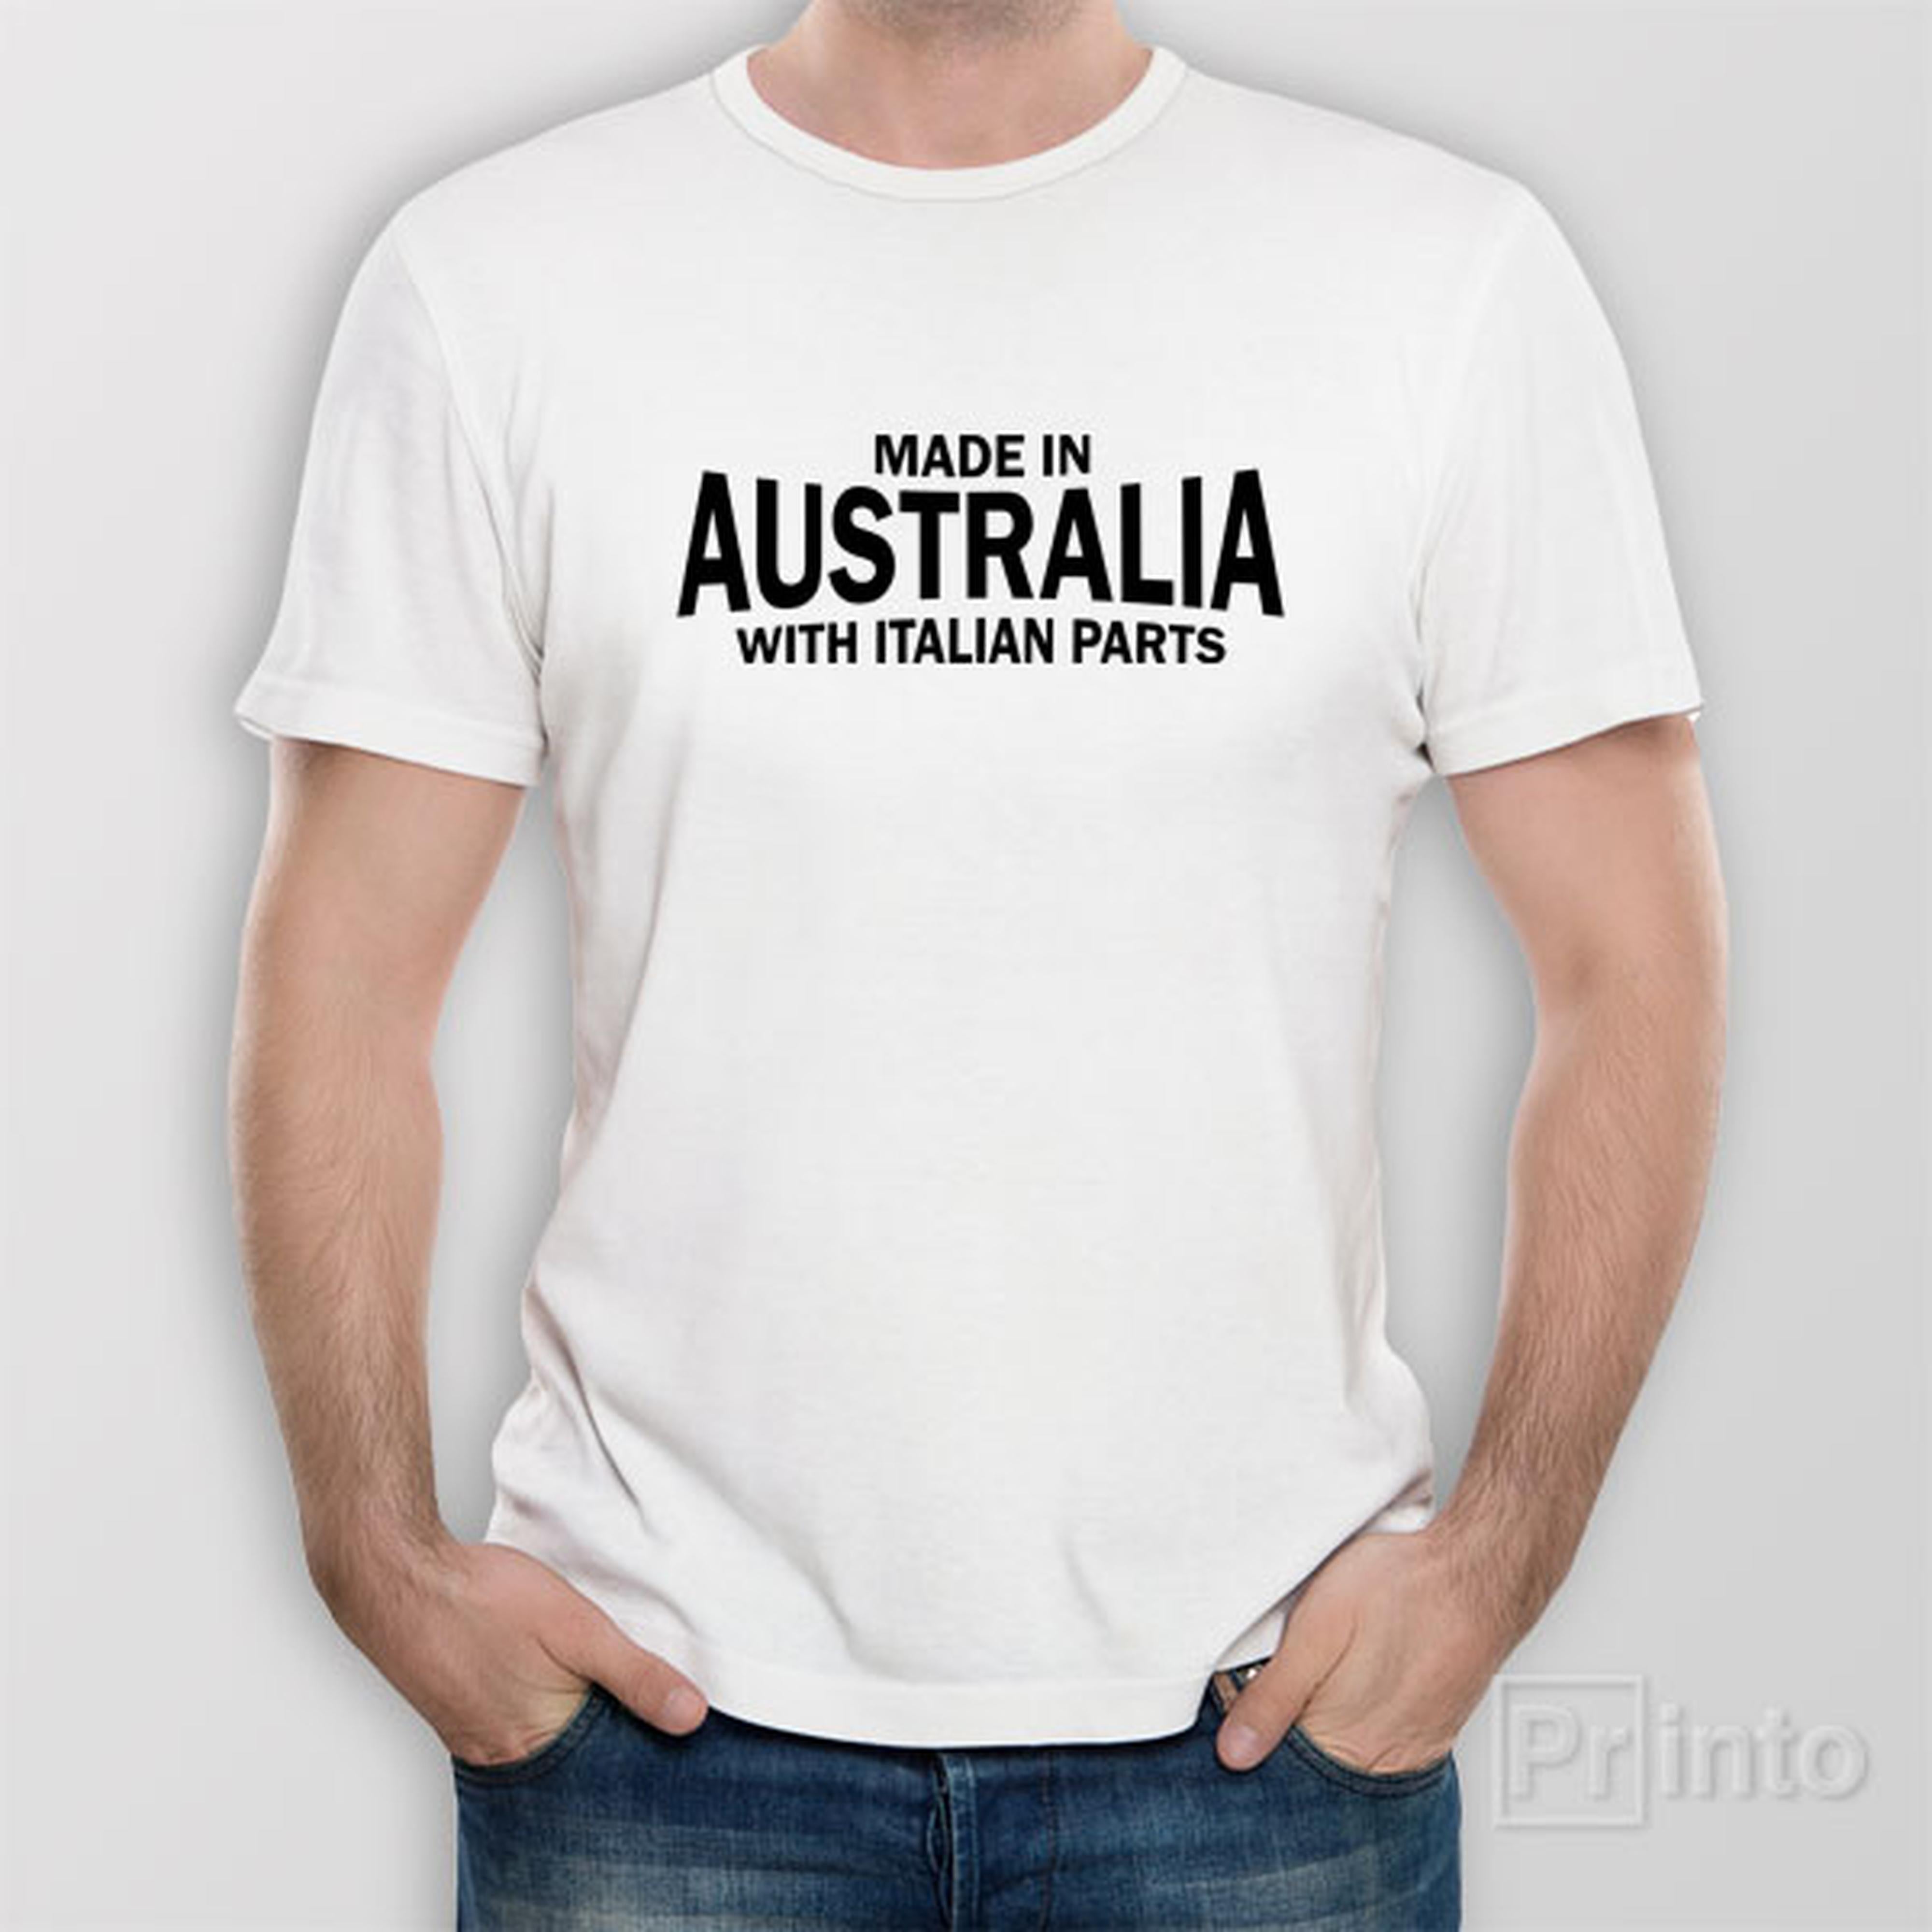 made-in-australia-with-italian-parts-t-shirt